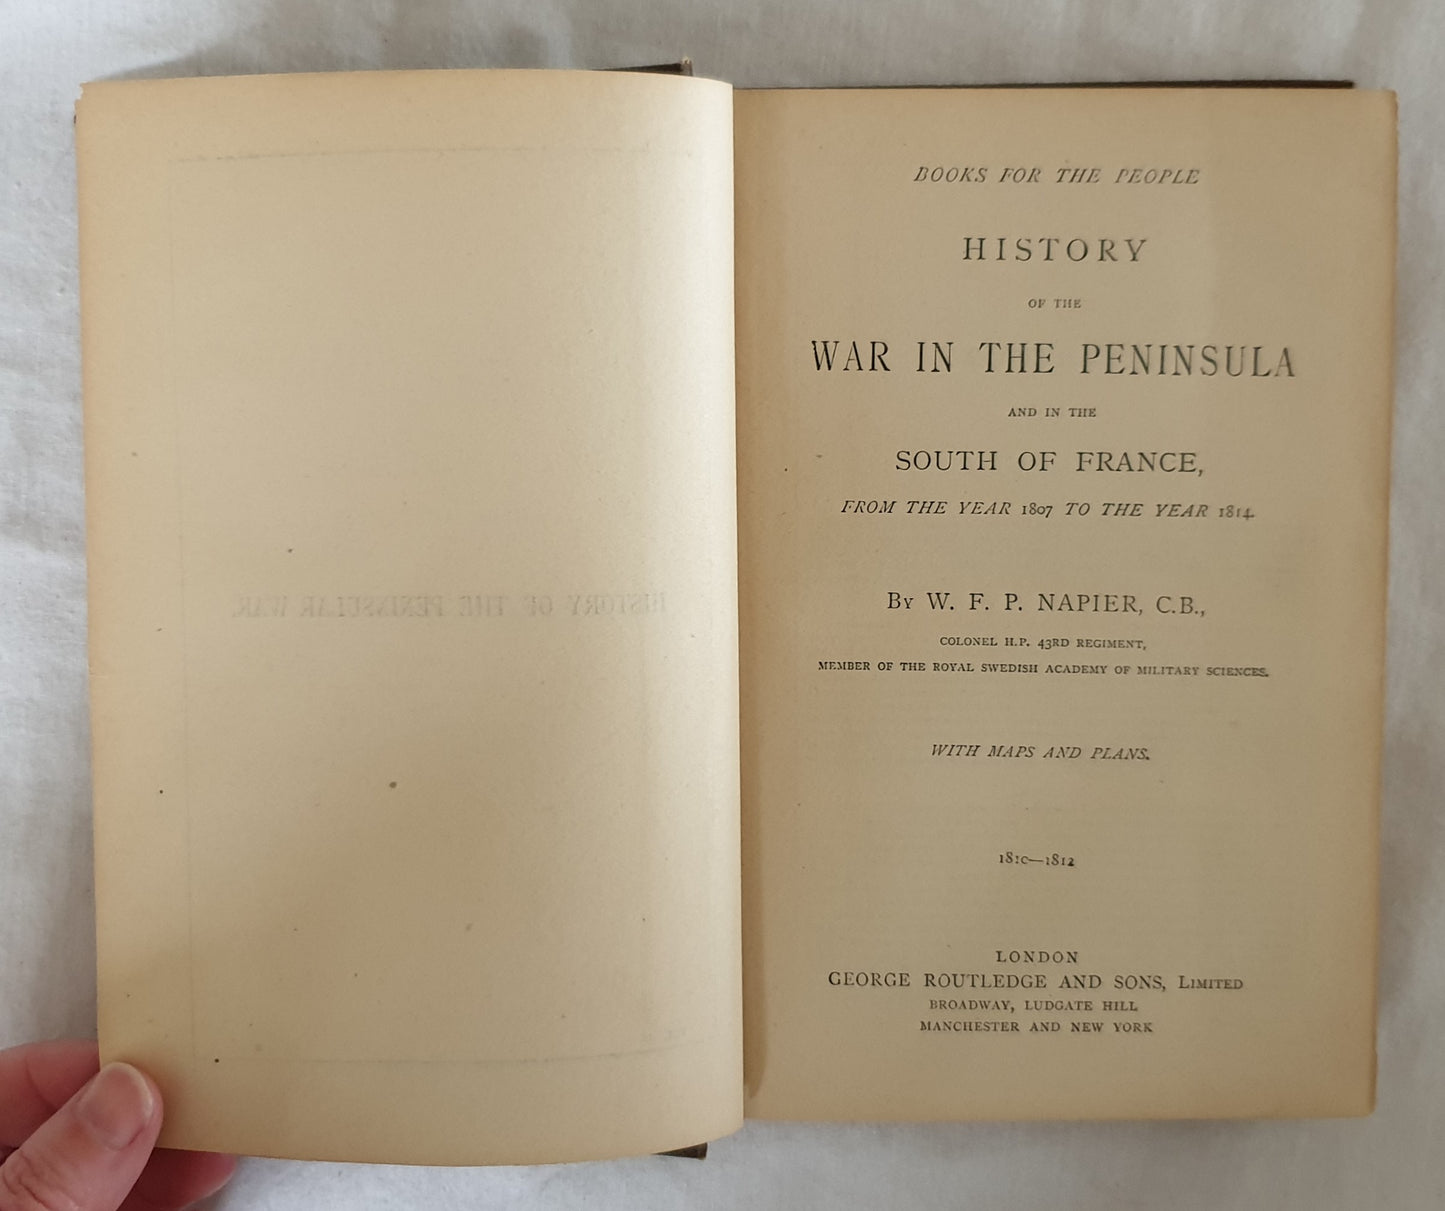 History of the War in the Peninsula and in the South of France  From the Year 1807 to the year 1814